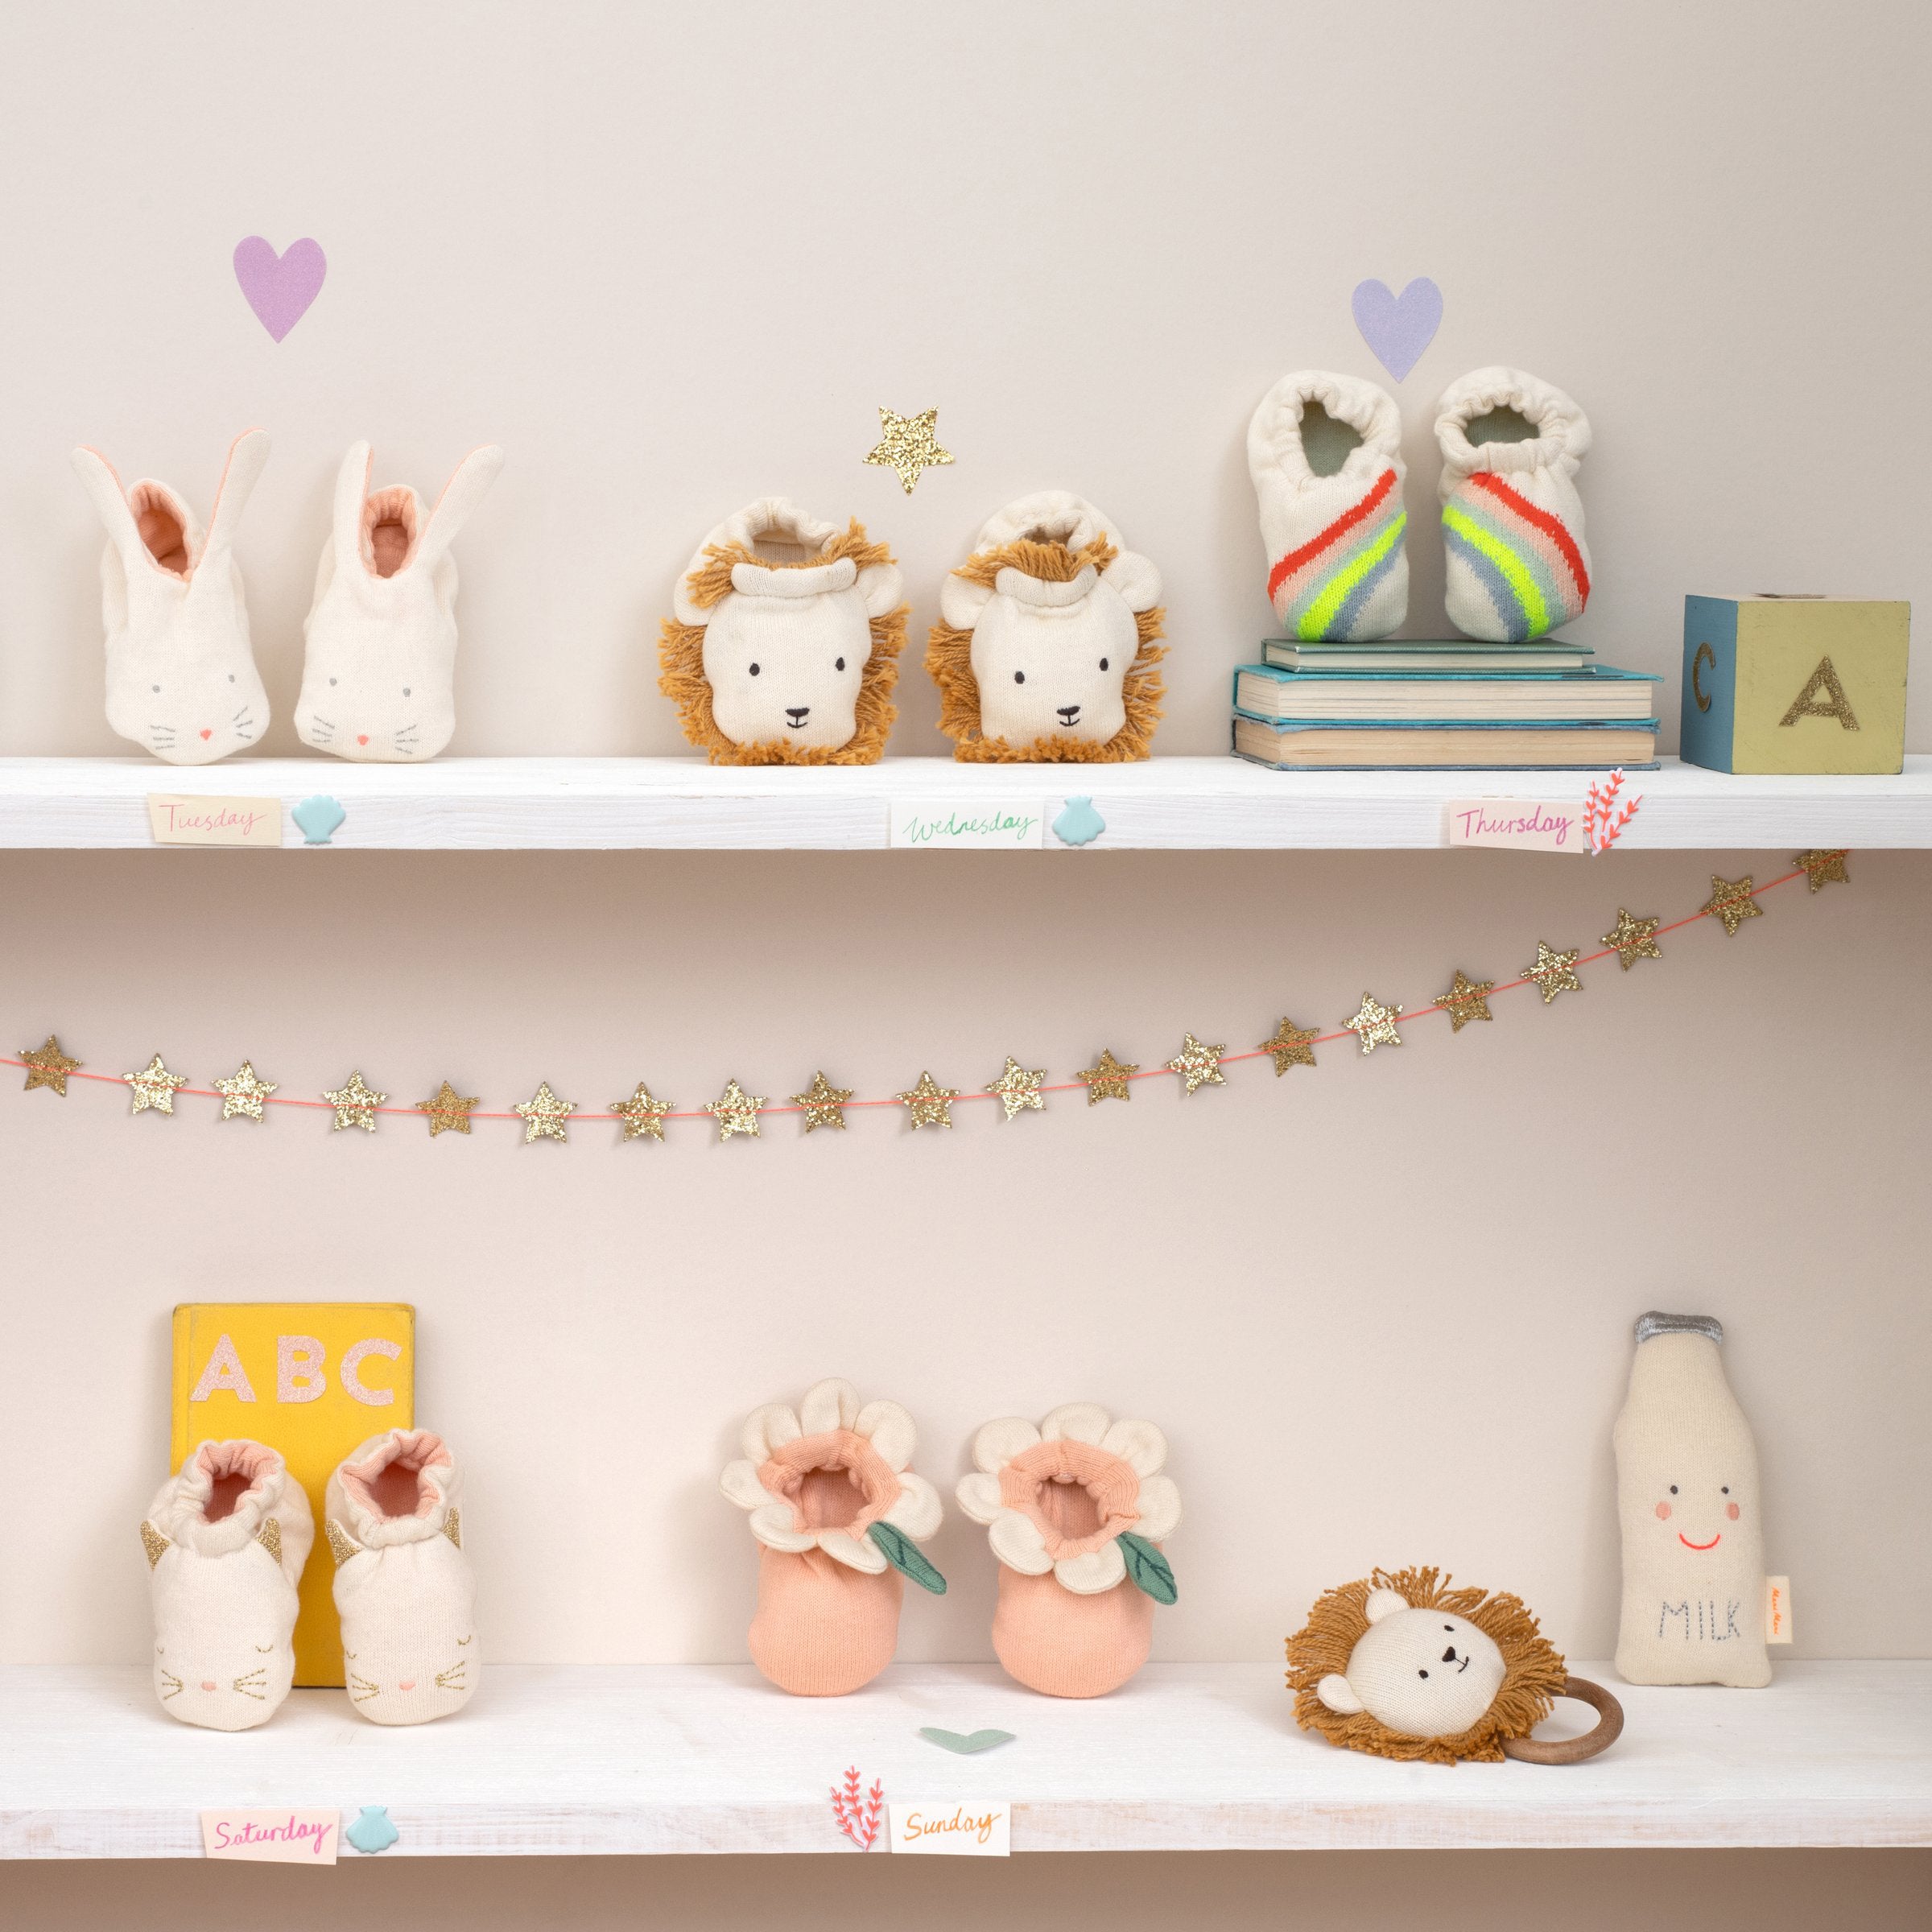 If you're looking for baby shower gift ideas then our lion baby booties, crafted from organic cotton, are perfect.